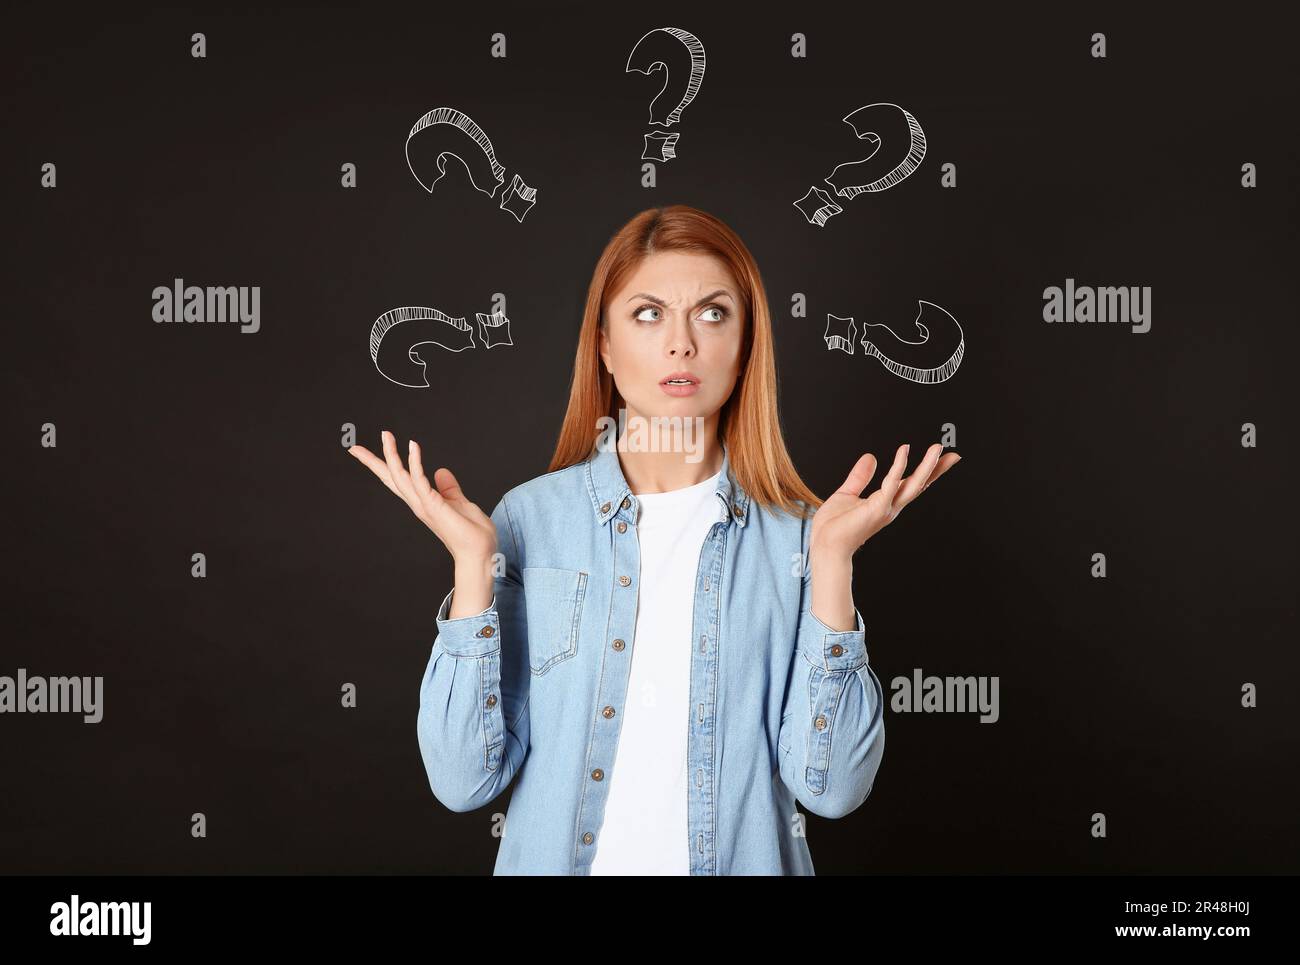 Choice in profession or other areas of life, concept. Making decision, thoughtful woman surrounded by drawn question marks on black background Stock Photo